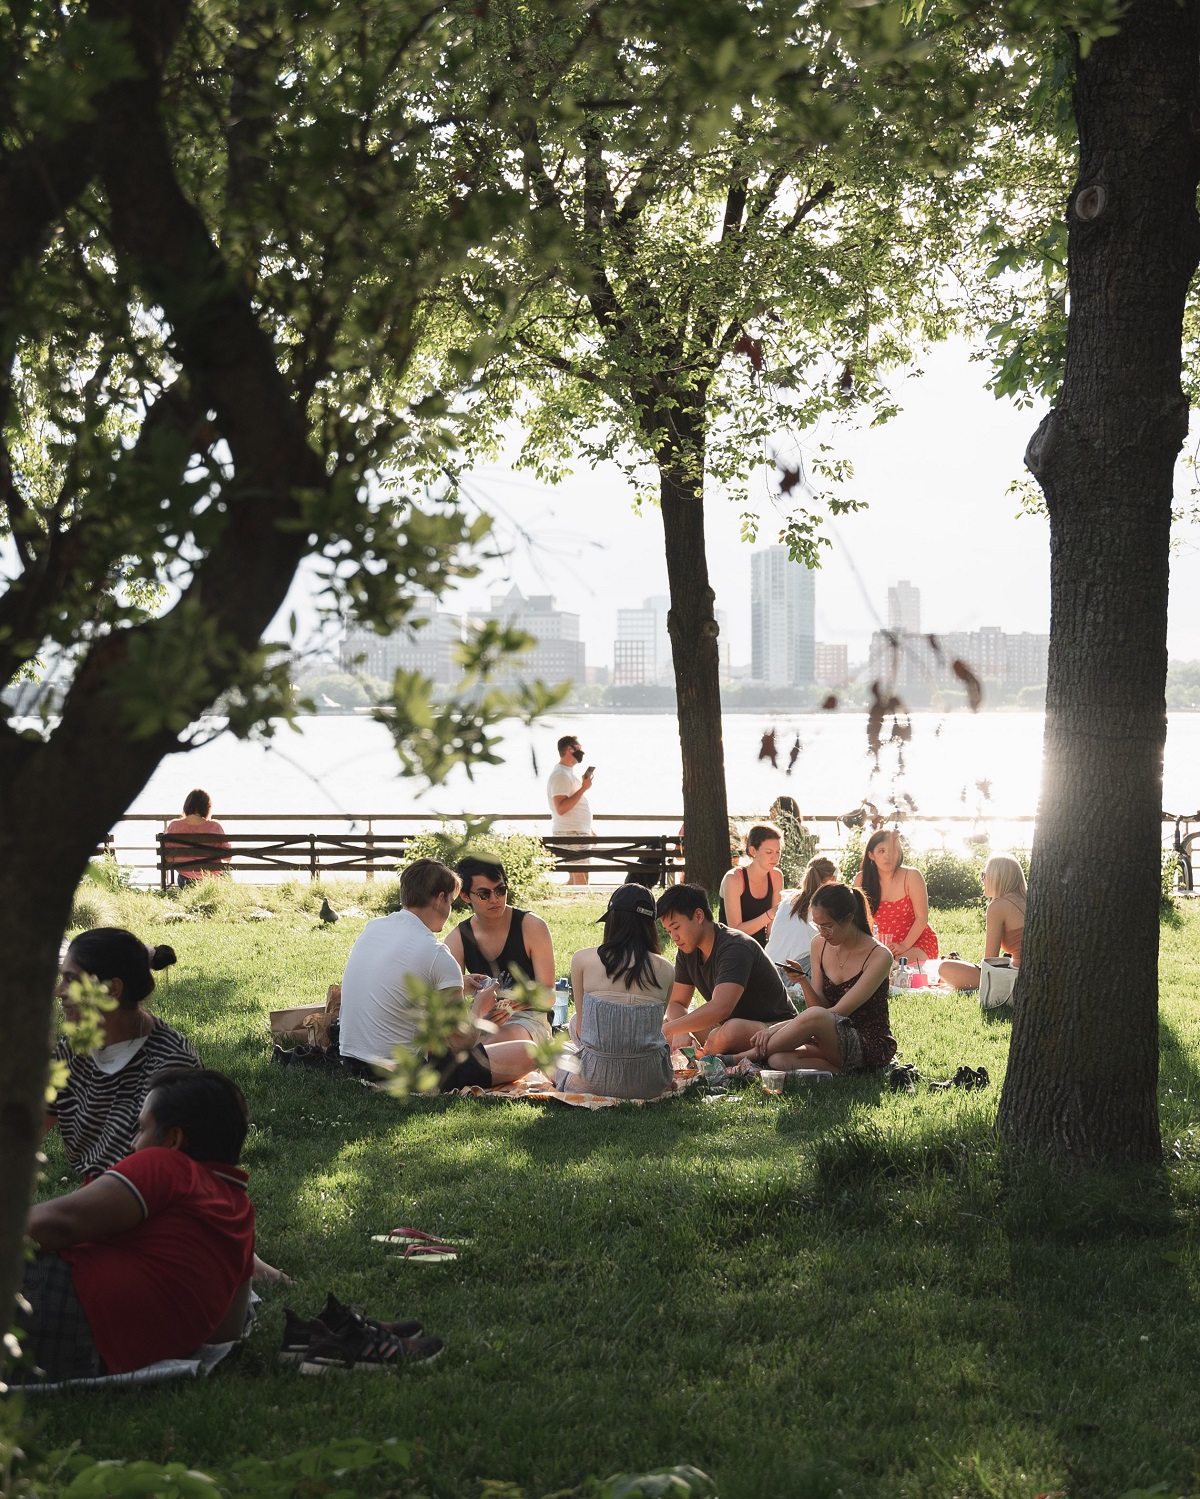 Small groups of people picnicing on a blanket under trees with the NYC skyline in the background